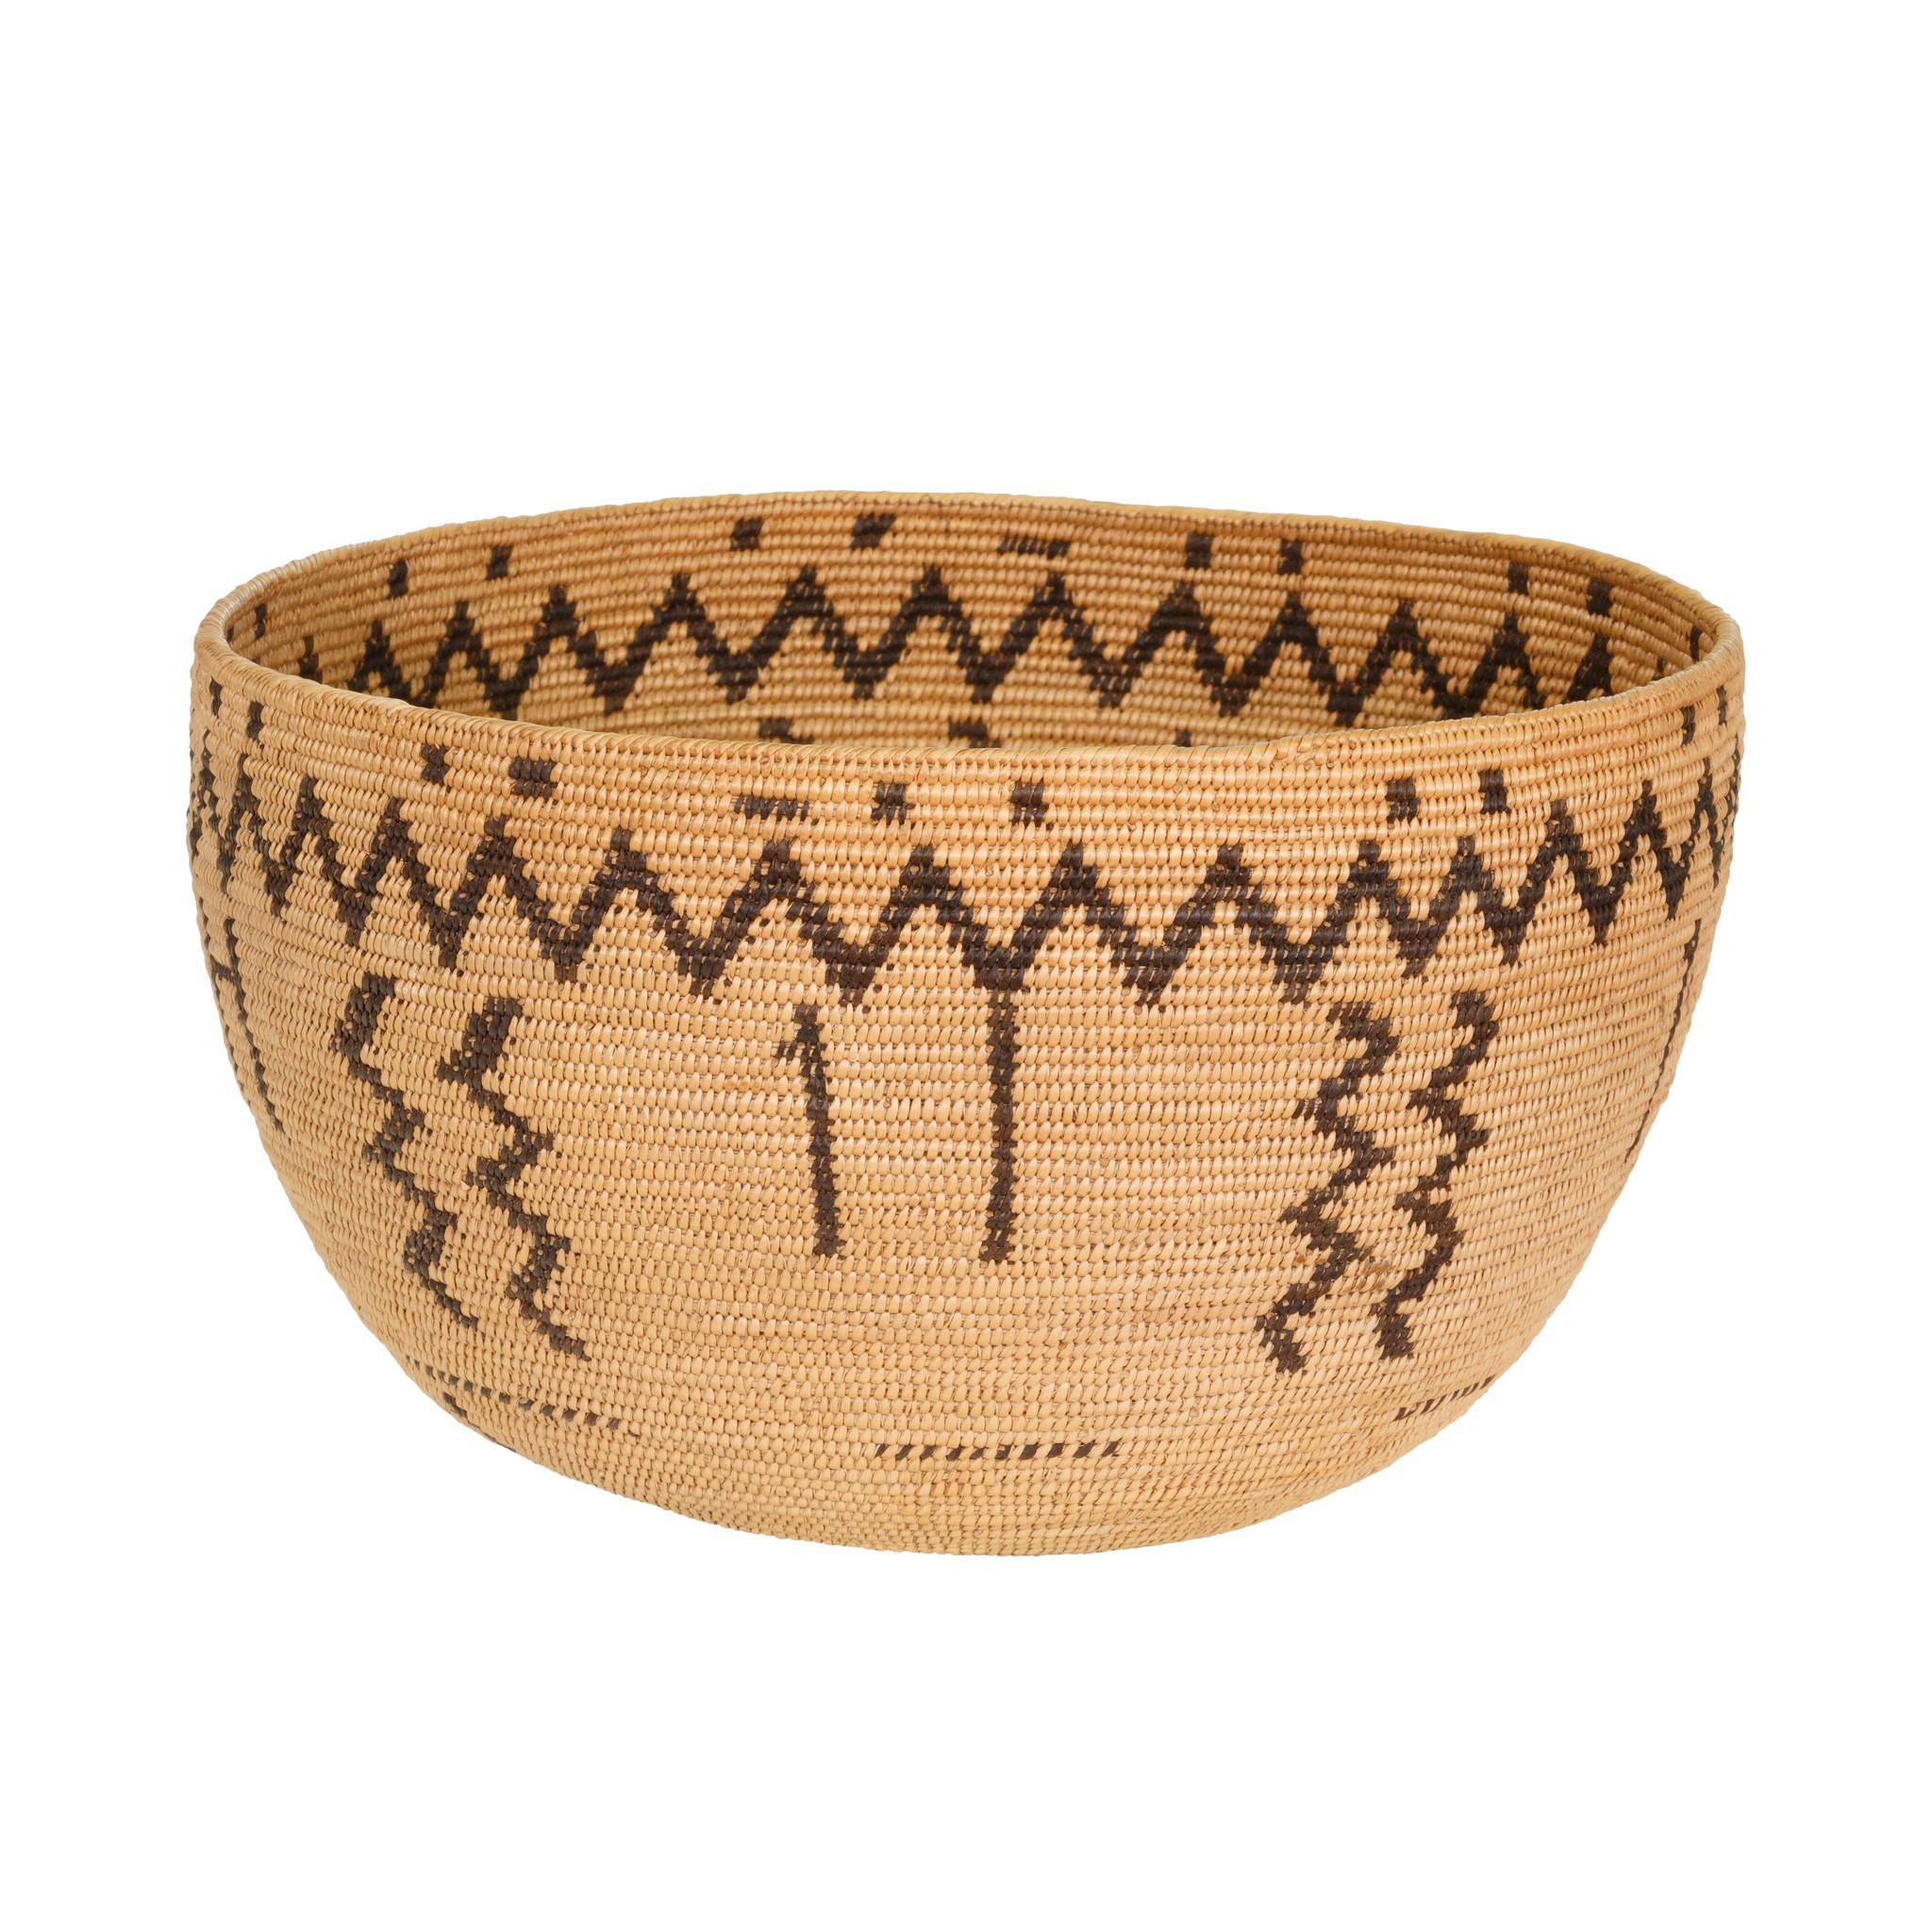 Finely woven Miwok bowl with multiple geometric designs on side and bottom.

Period: Last quarter of the 19th century.

Origin: Miwok.

Size: 5